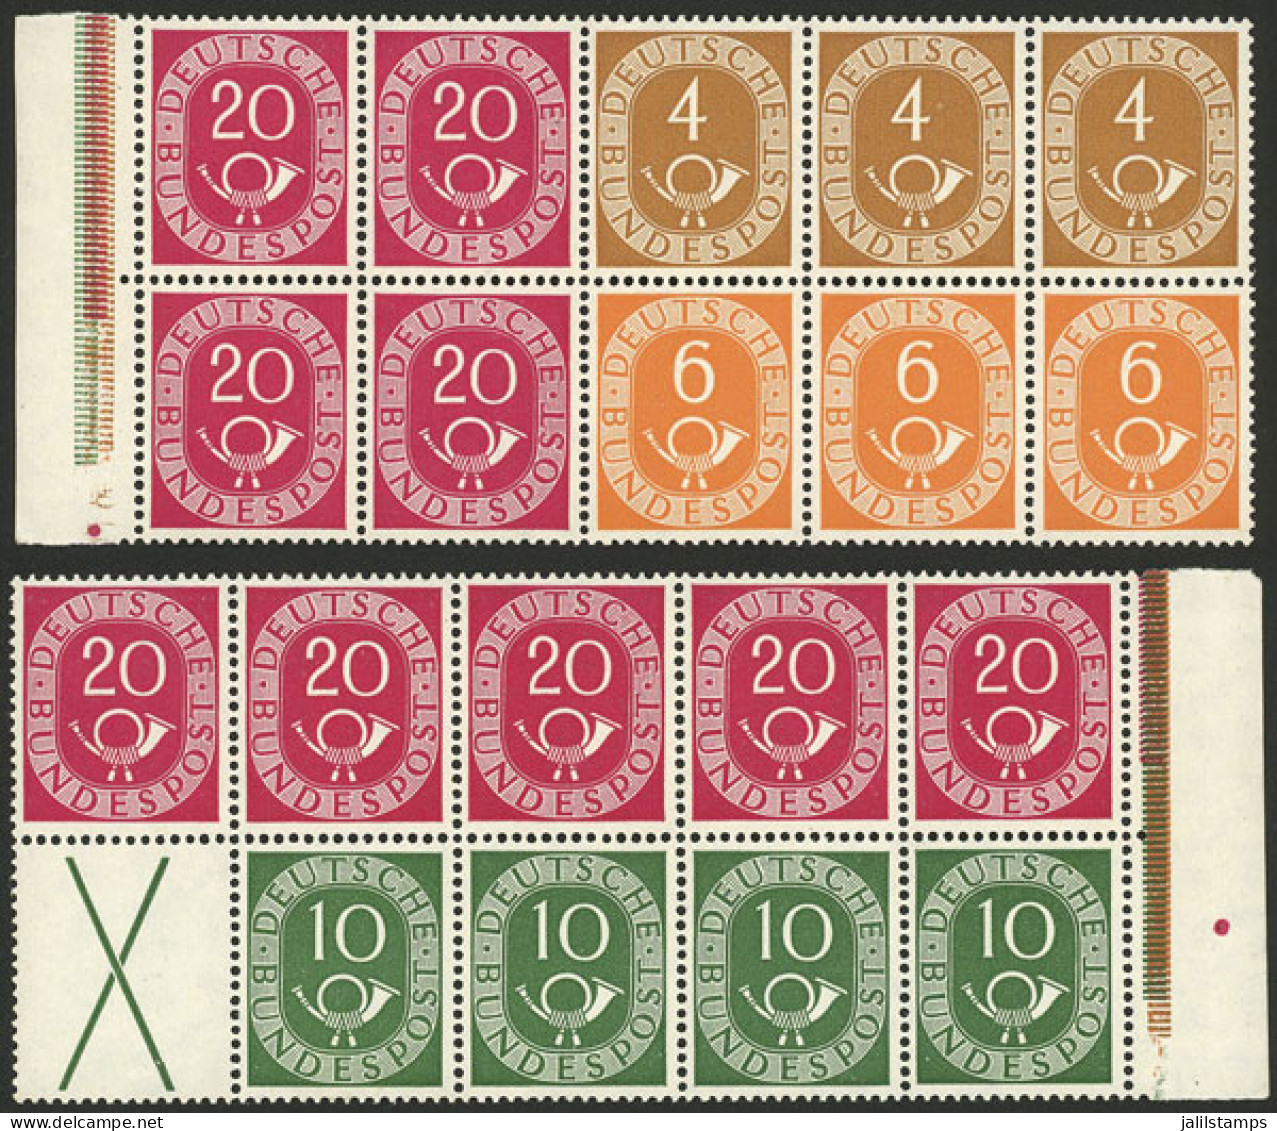 WEST GERMANY: Yvert 10 + Other Values, 1951/2 Post Horn, The 2 Panes Of The Booklet, Mint With Tiny Hinge Marks, Excelle - Nuevos